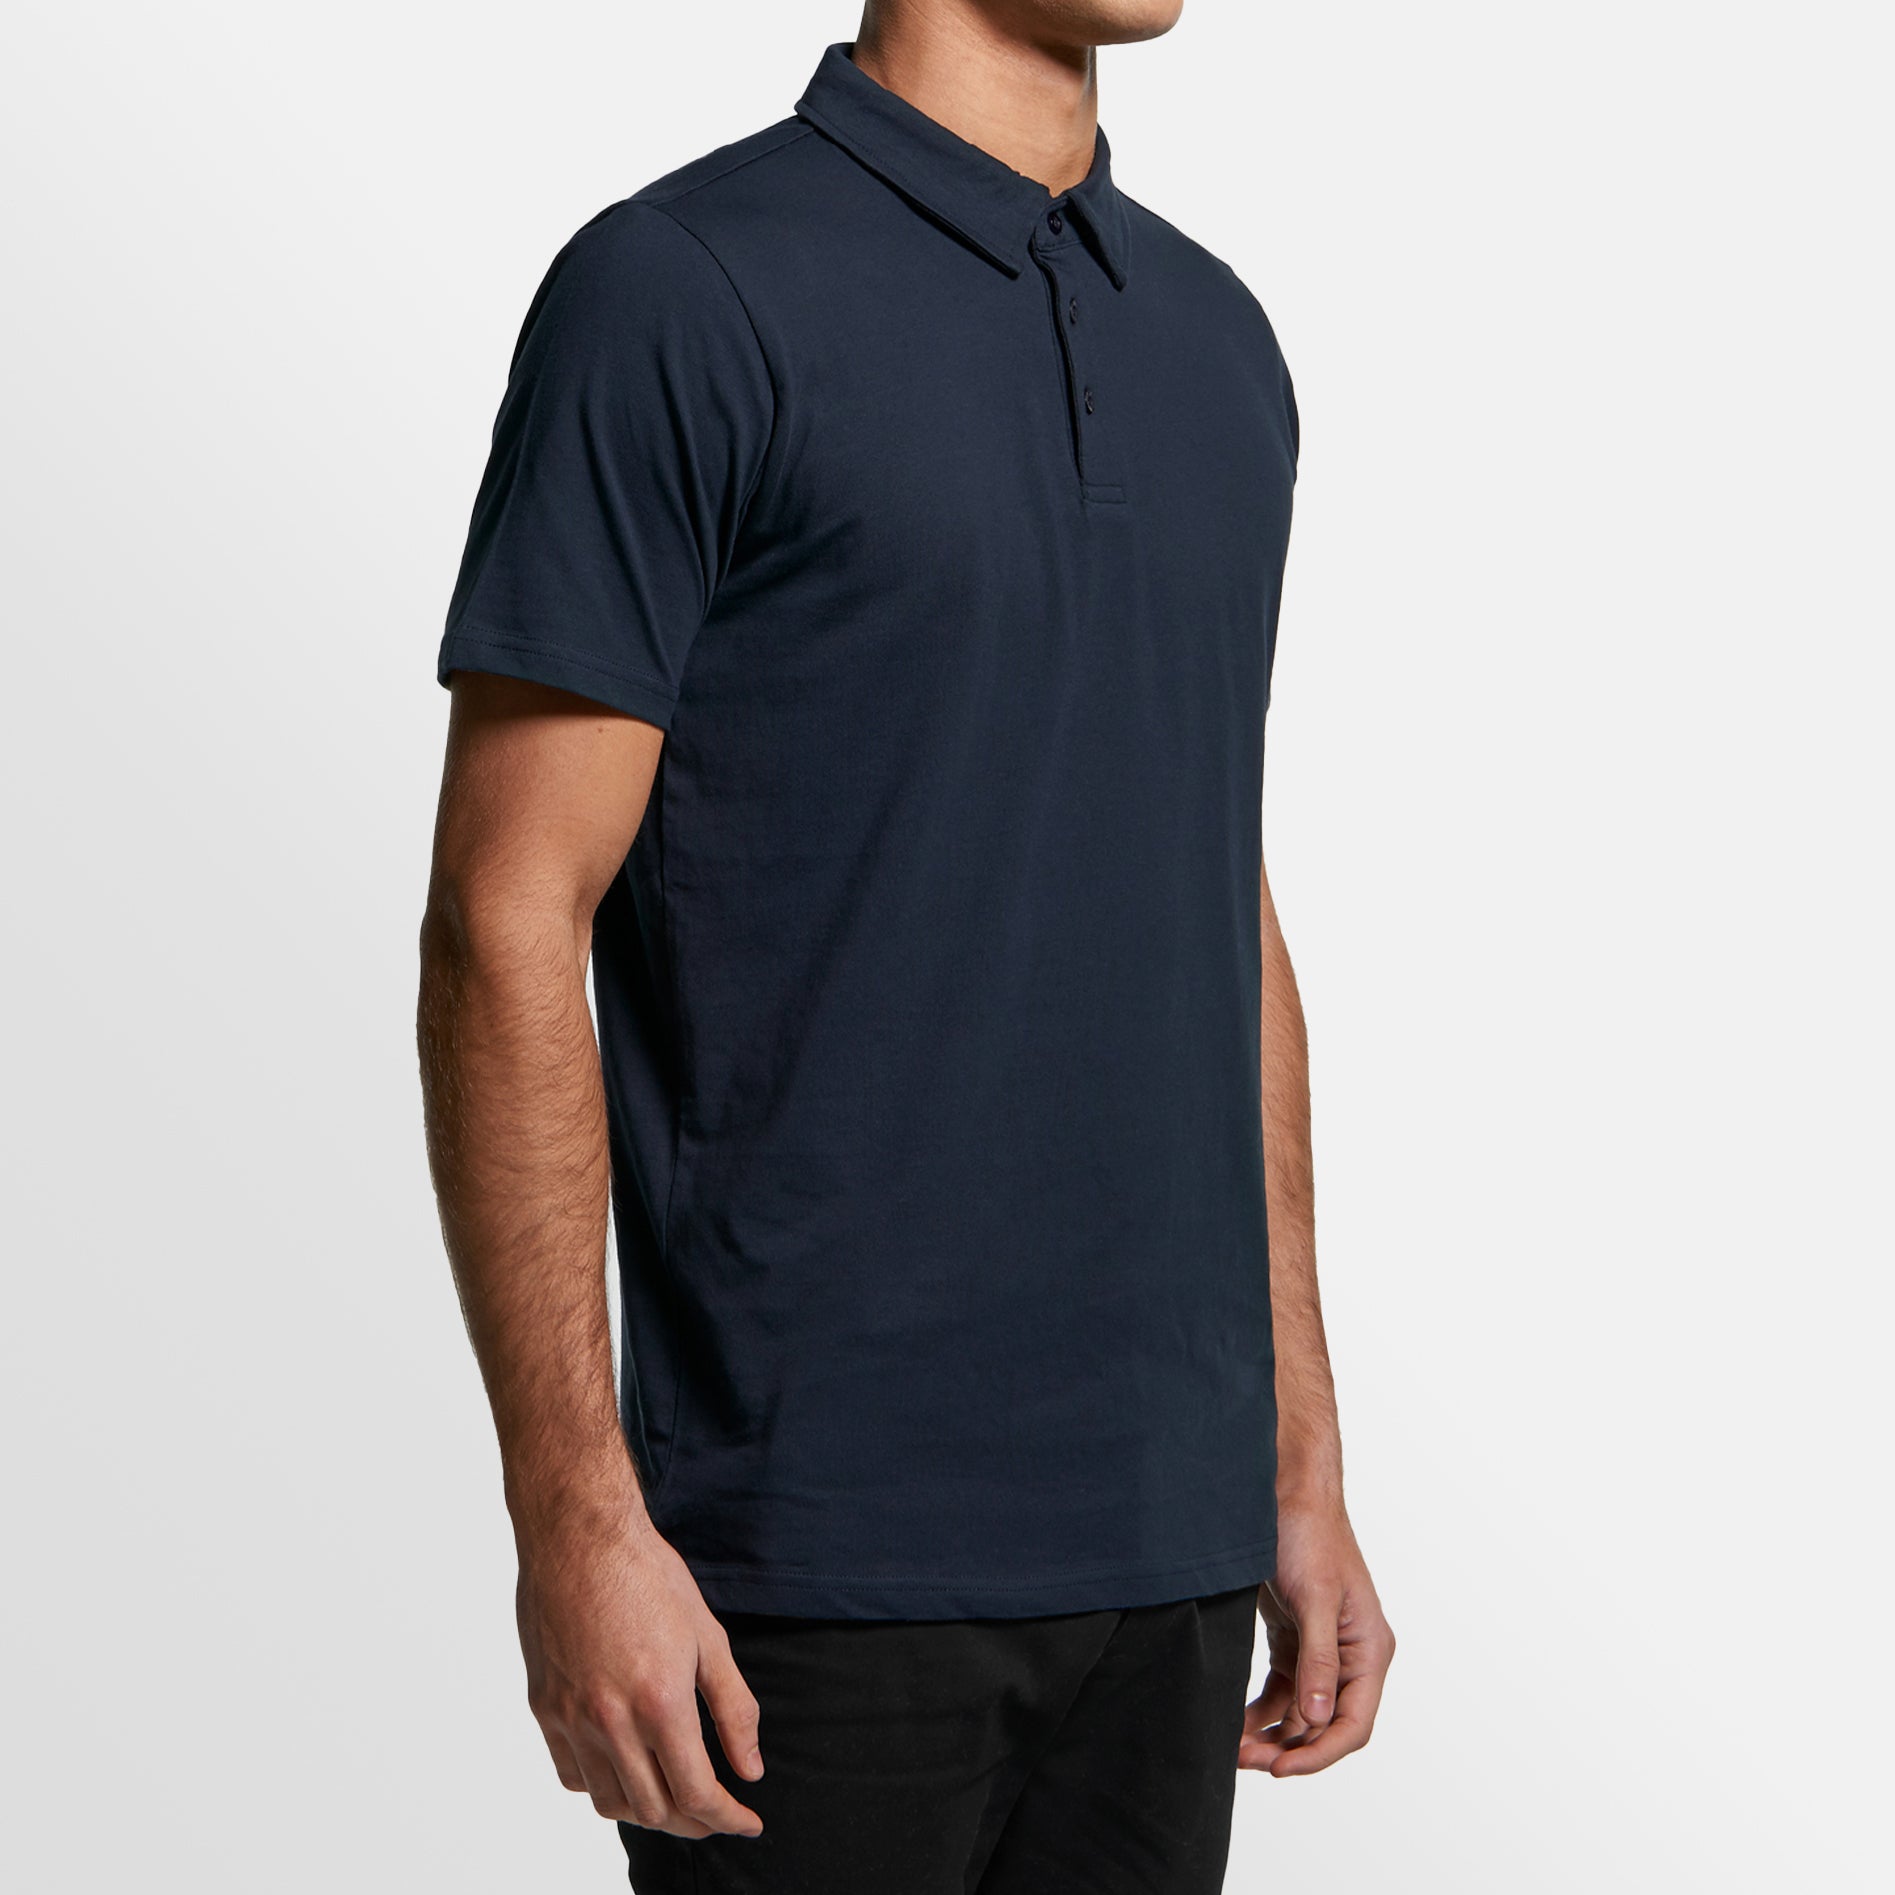 Chad Polo Shirt - On Request